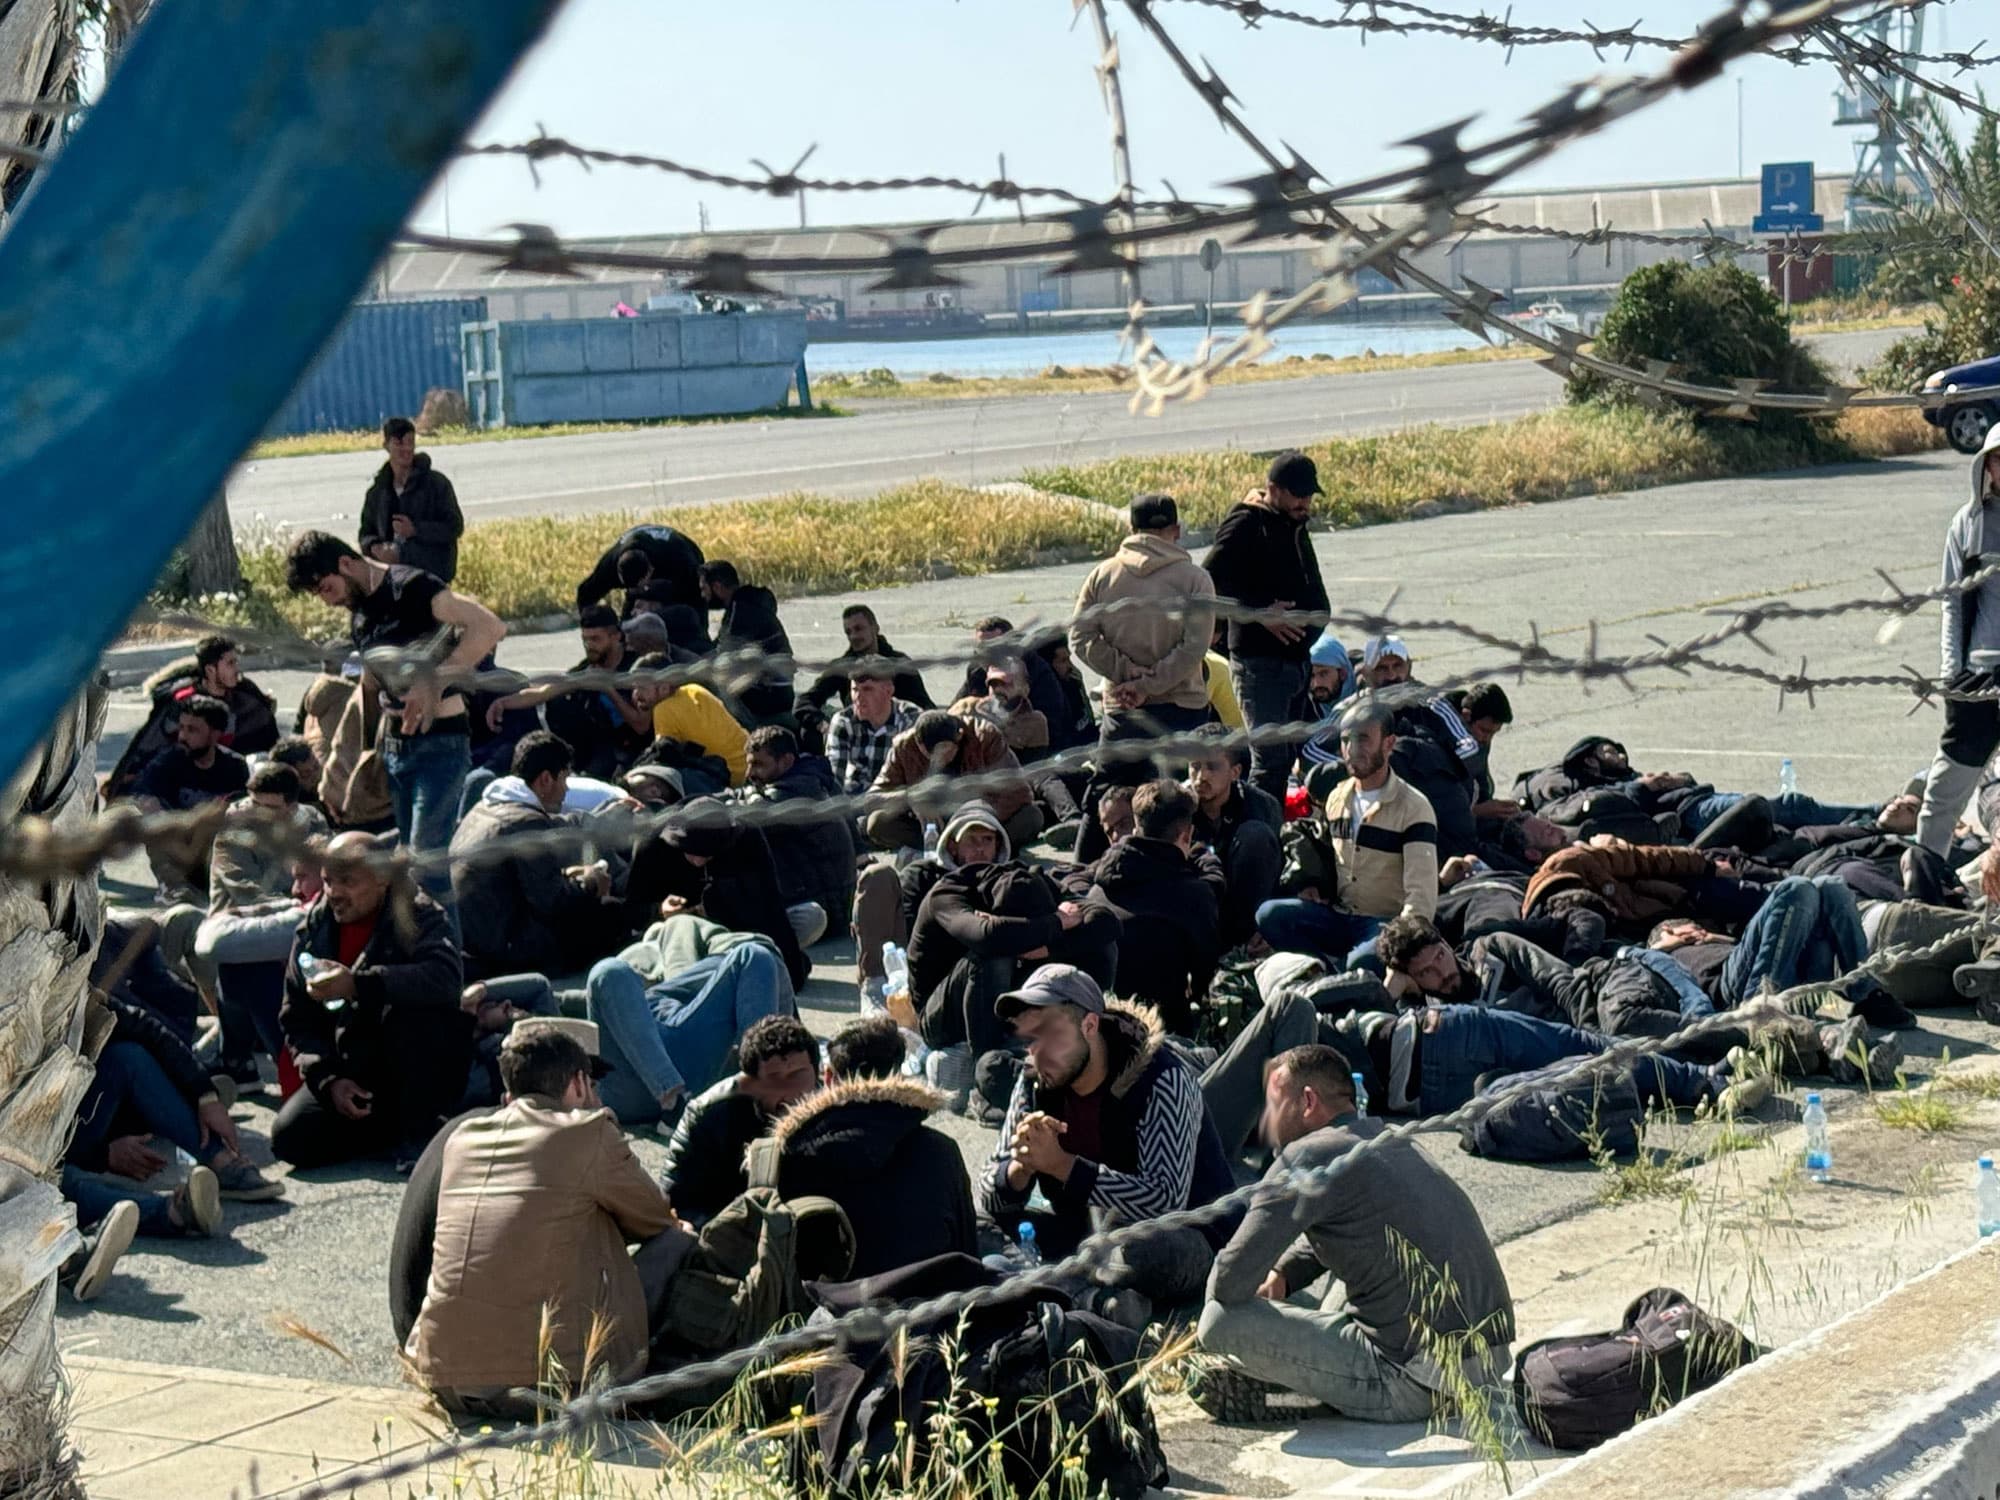 image Army camps may be used to house irregular migrants